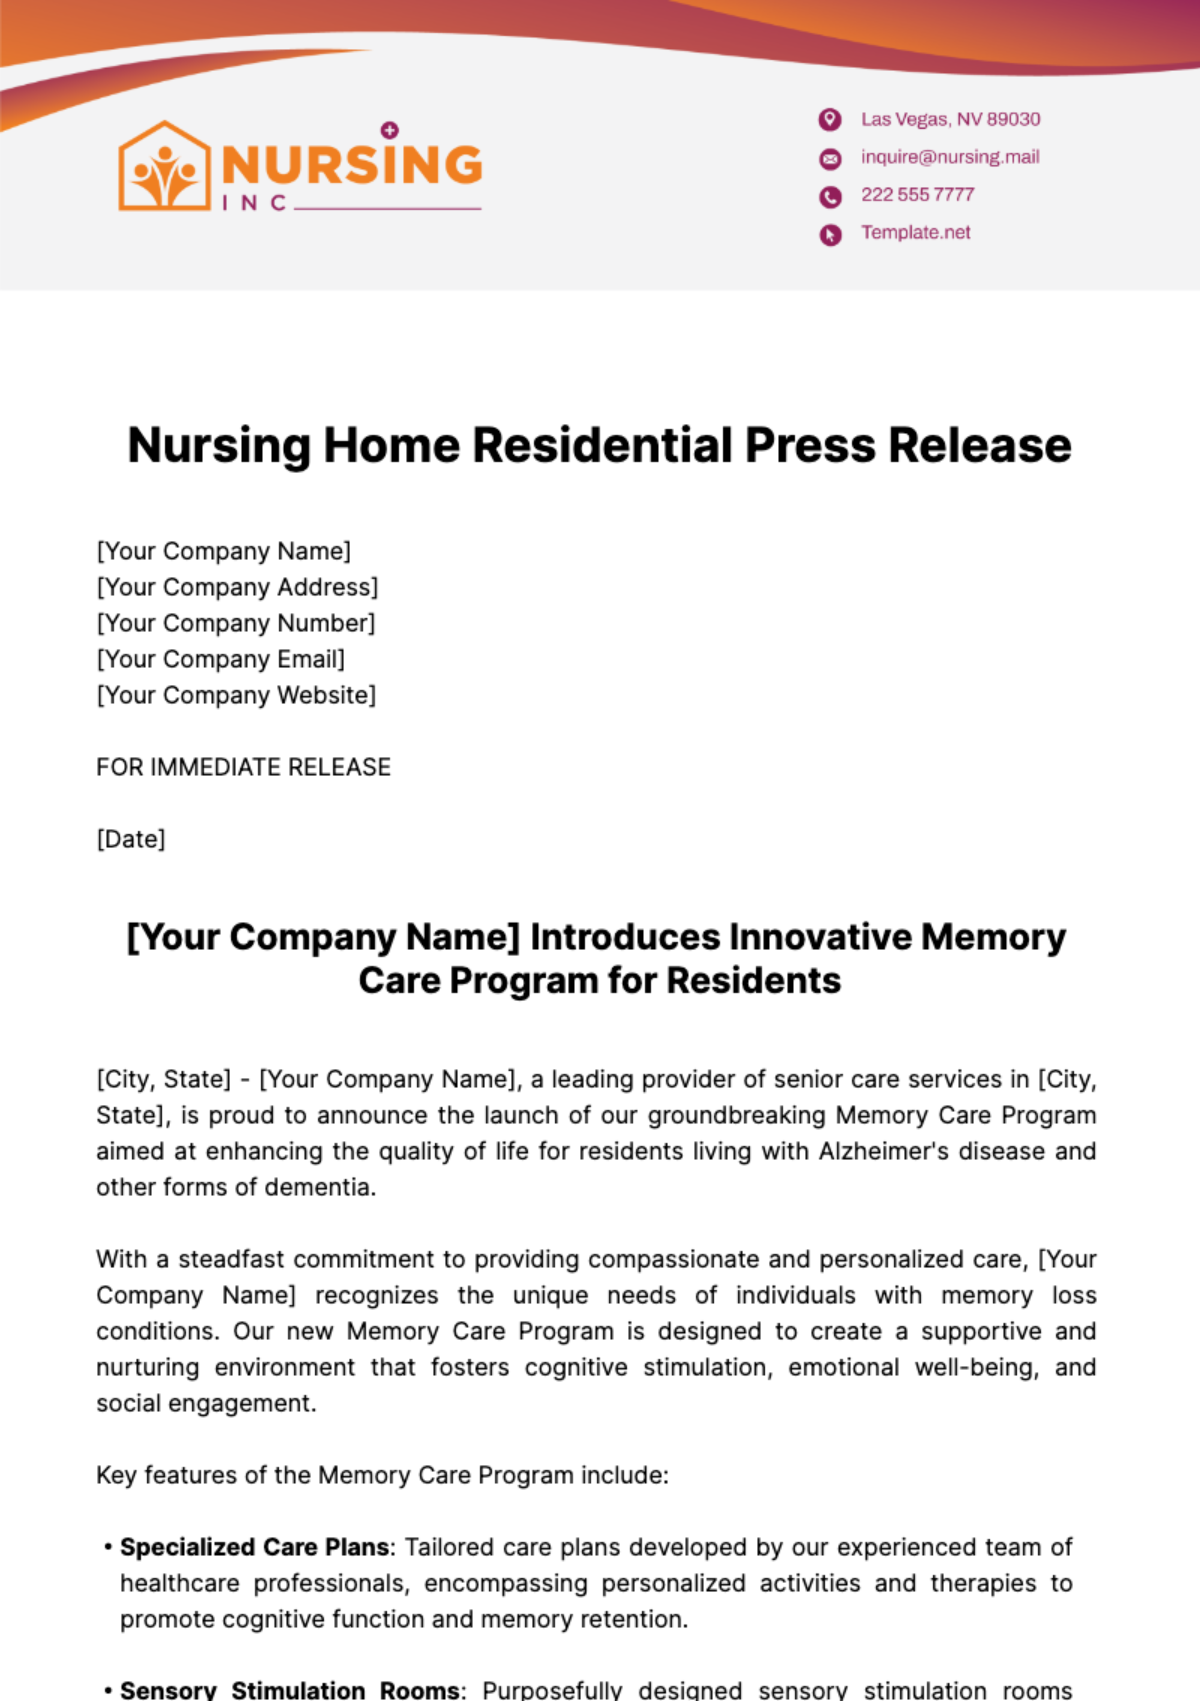 Nursing Home Residential Press Release Template